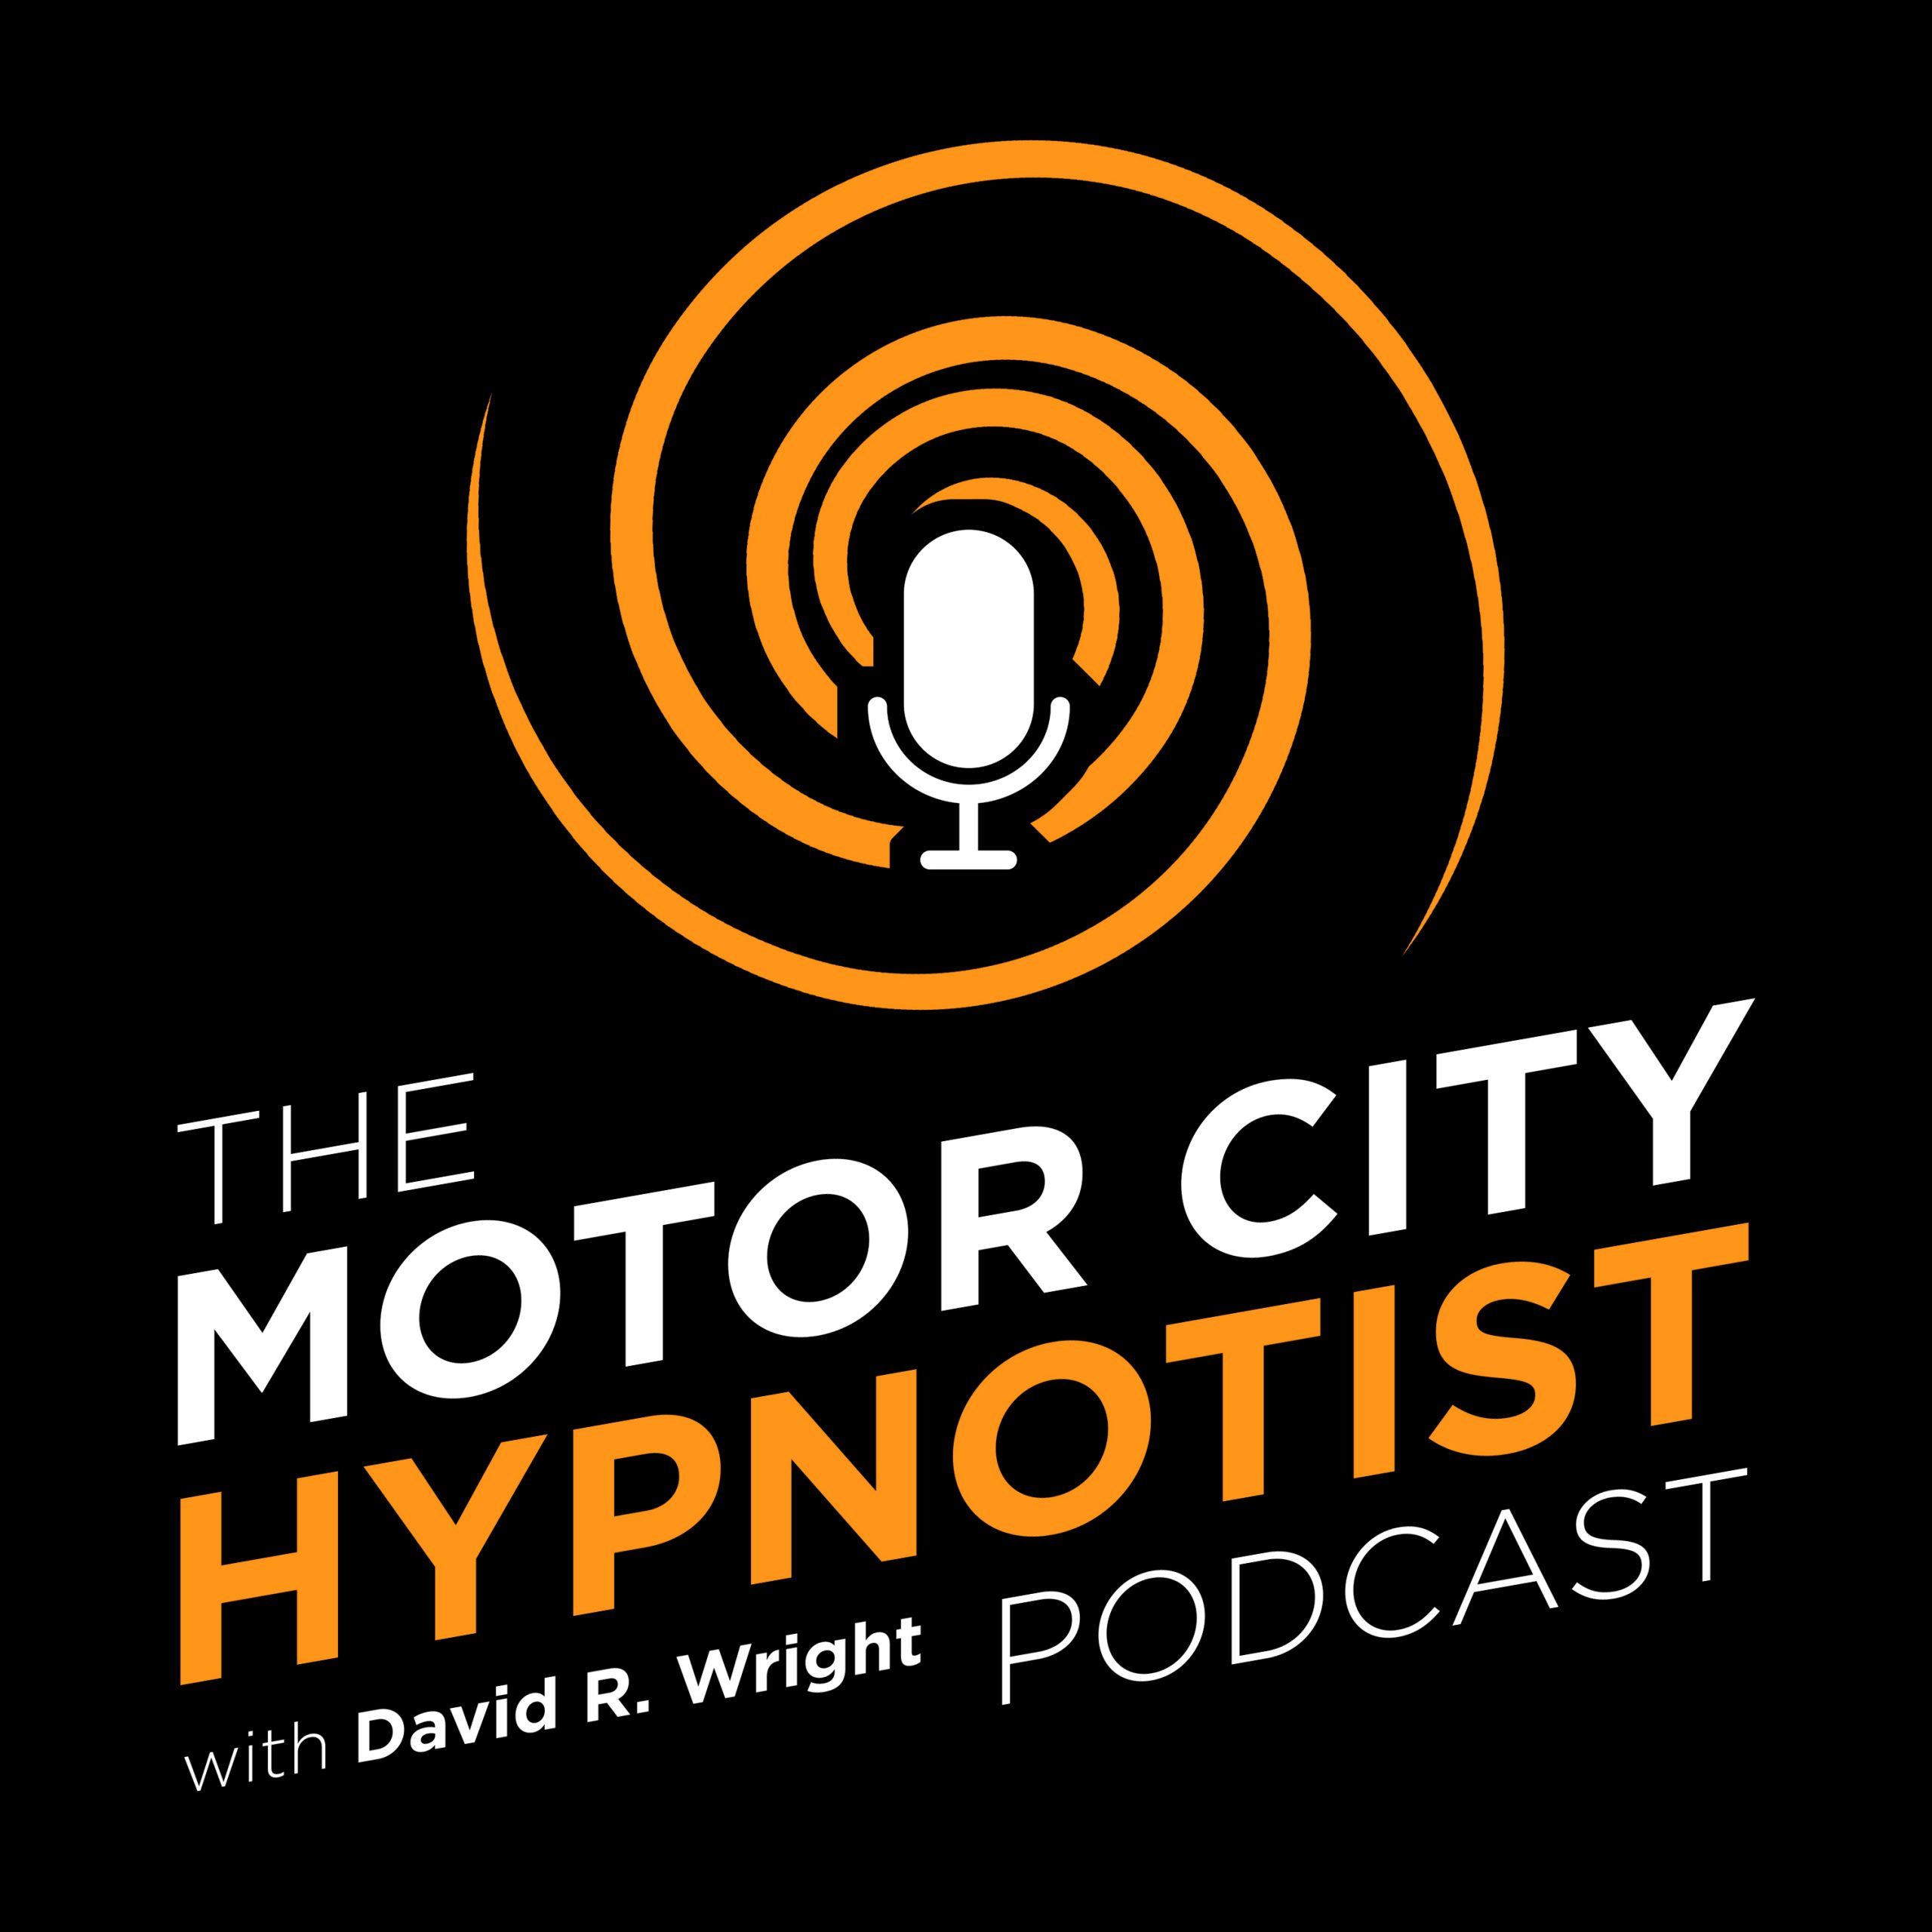 Motor City Hypnotist Podcast with David Wright -Episode 51 Therapy Q & A, Part 1